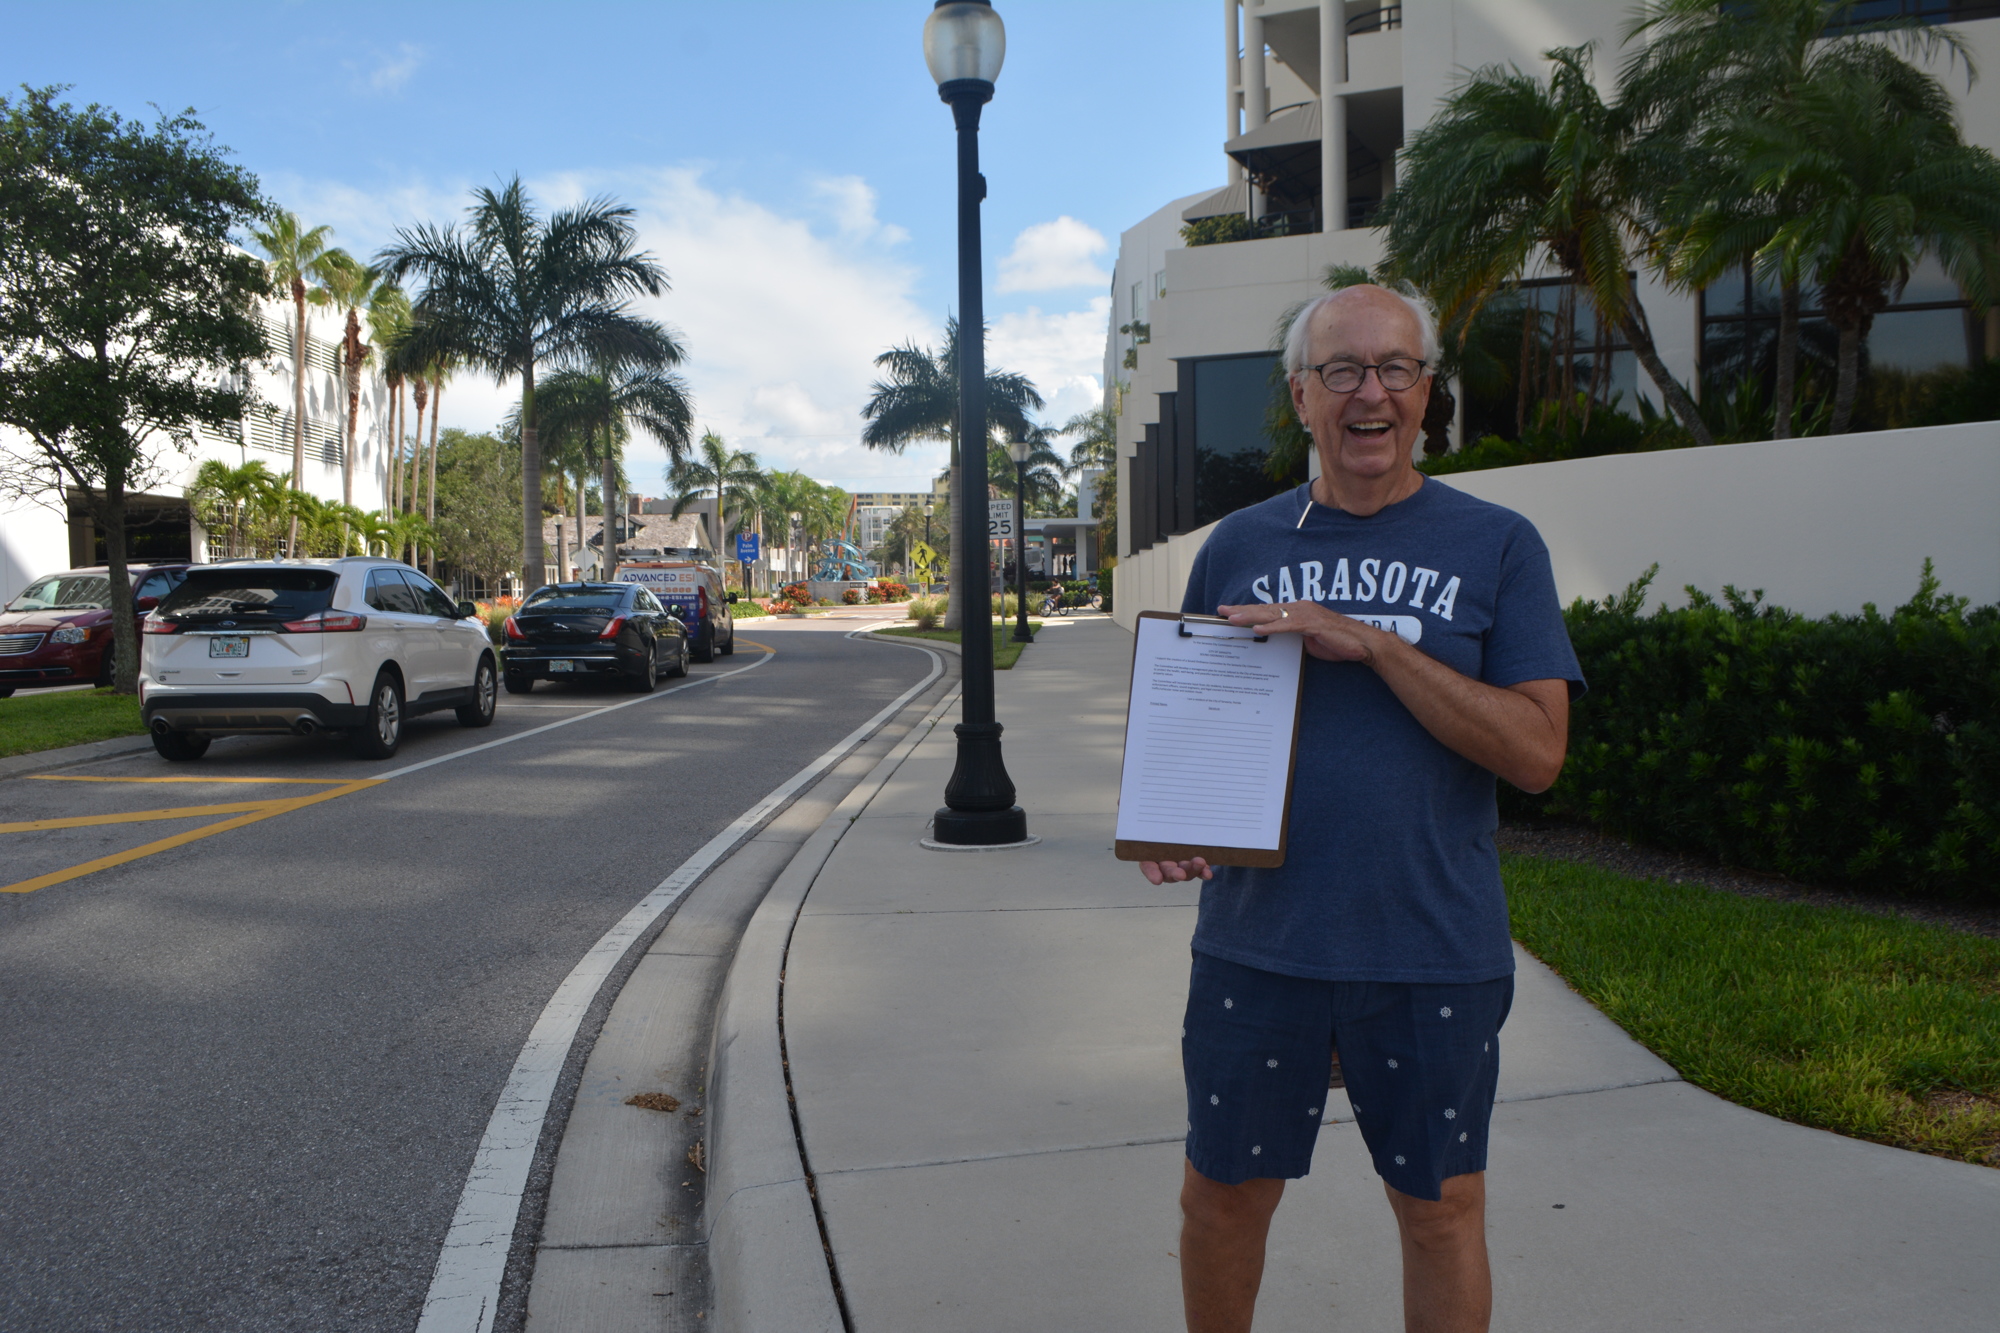 Downtown resident Drew Clearie is gathering signatures in support of the creation of a citizen-led sound ordinance committee. So far, city officials haven't pursued the concept, but he believes it could solve long-standing issues.